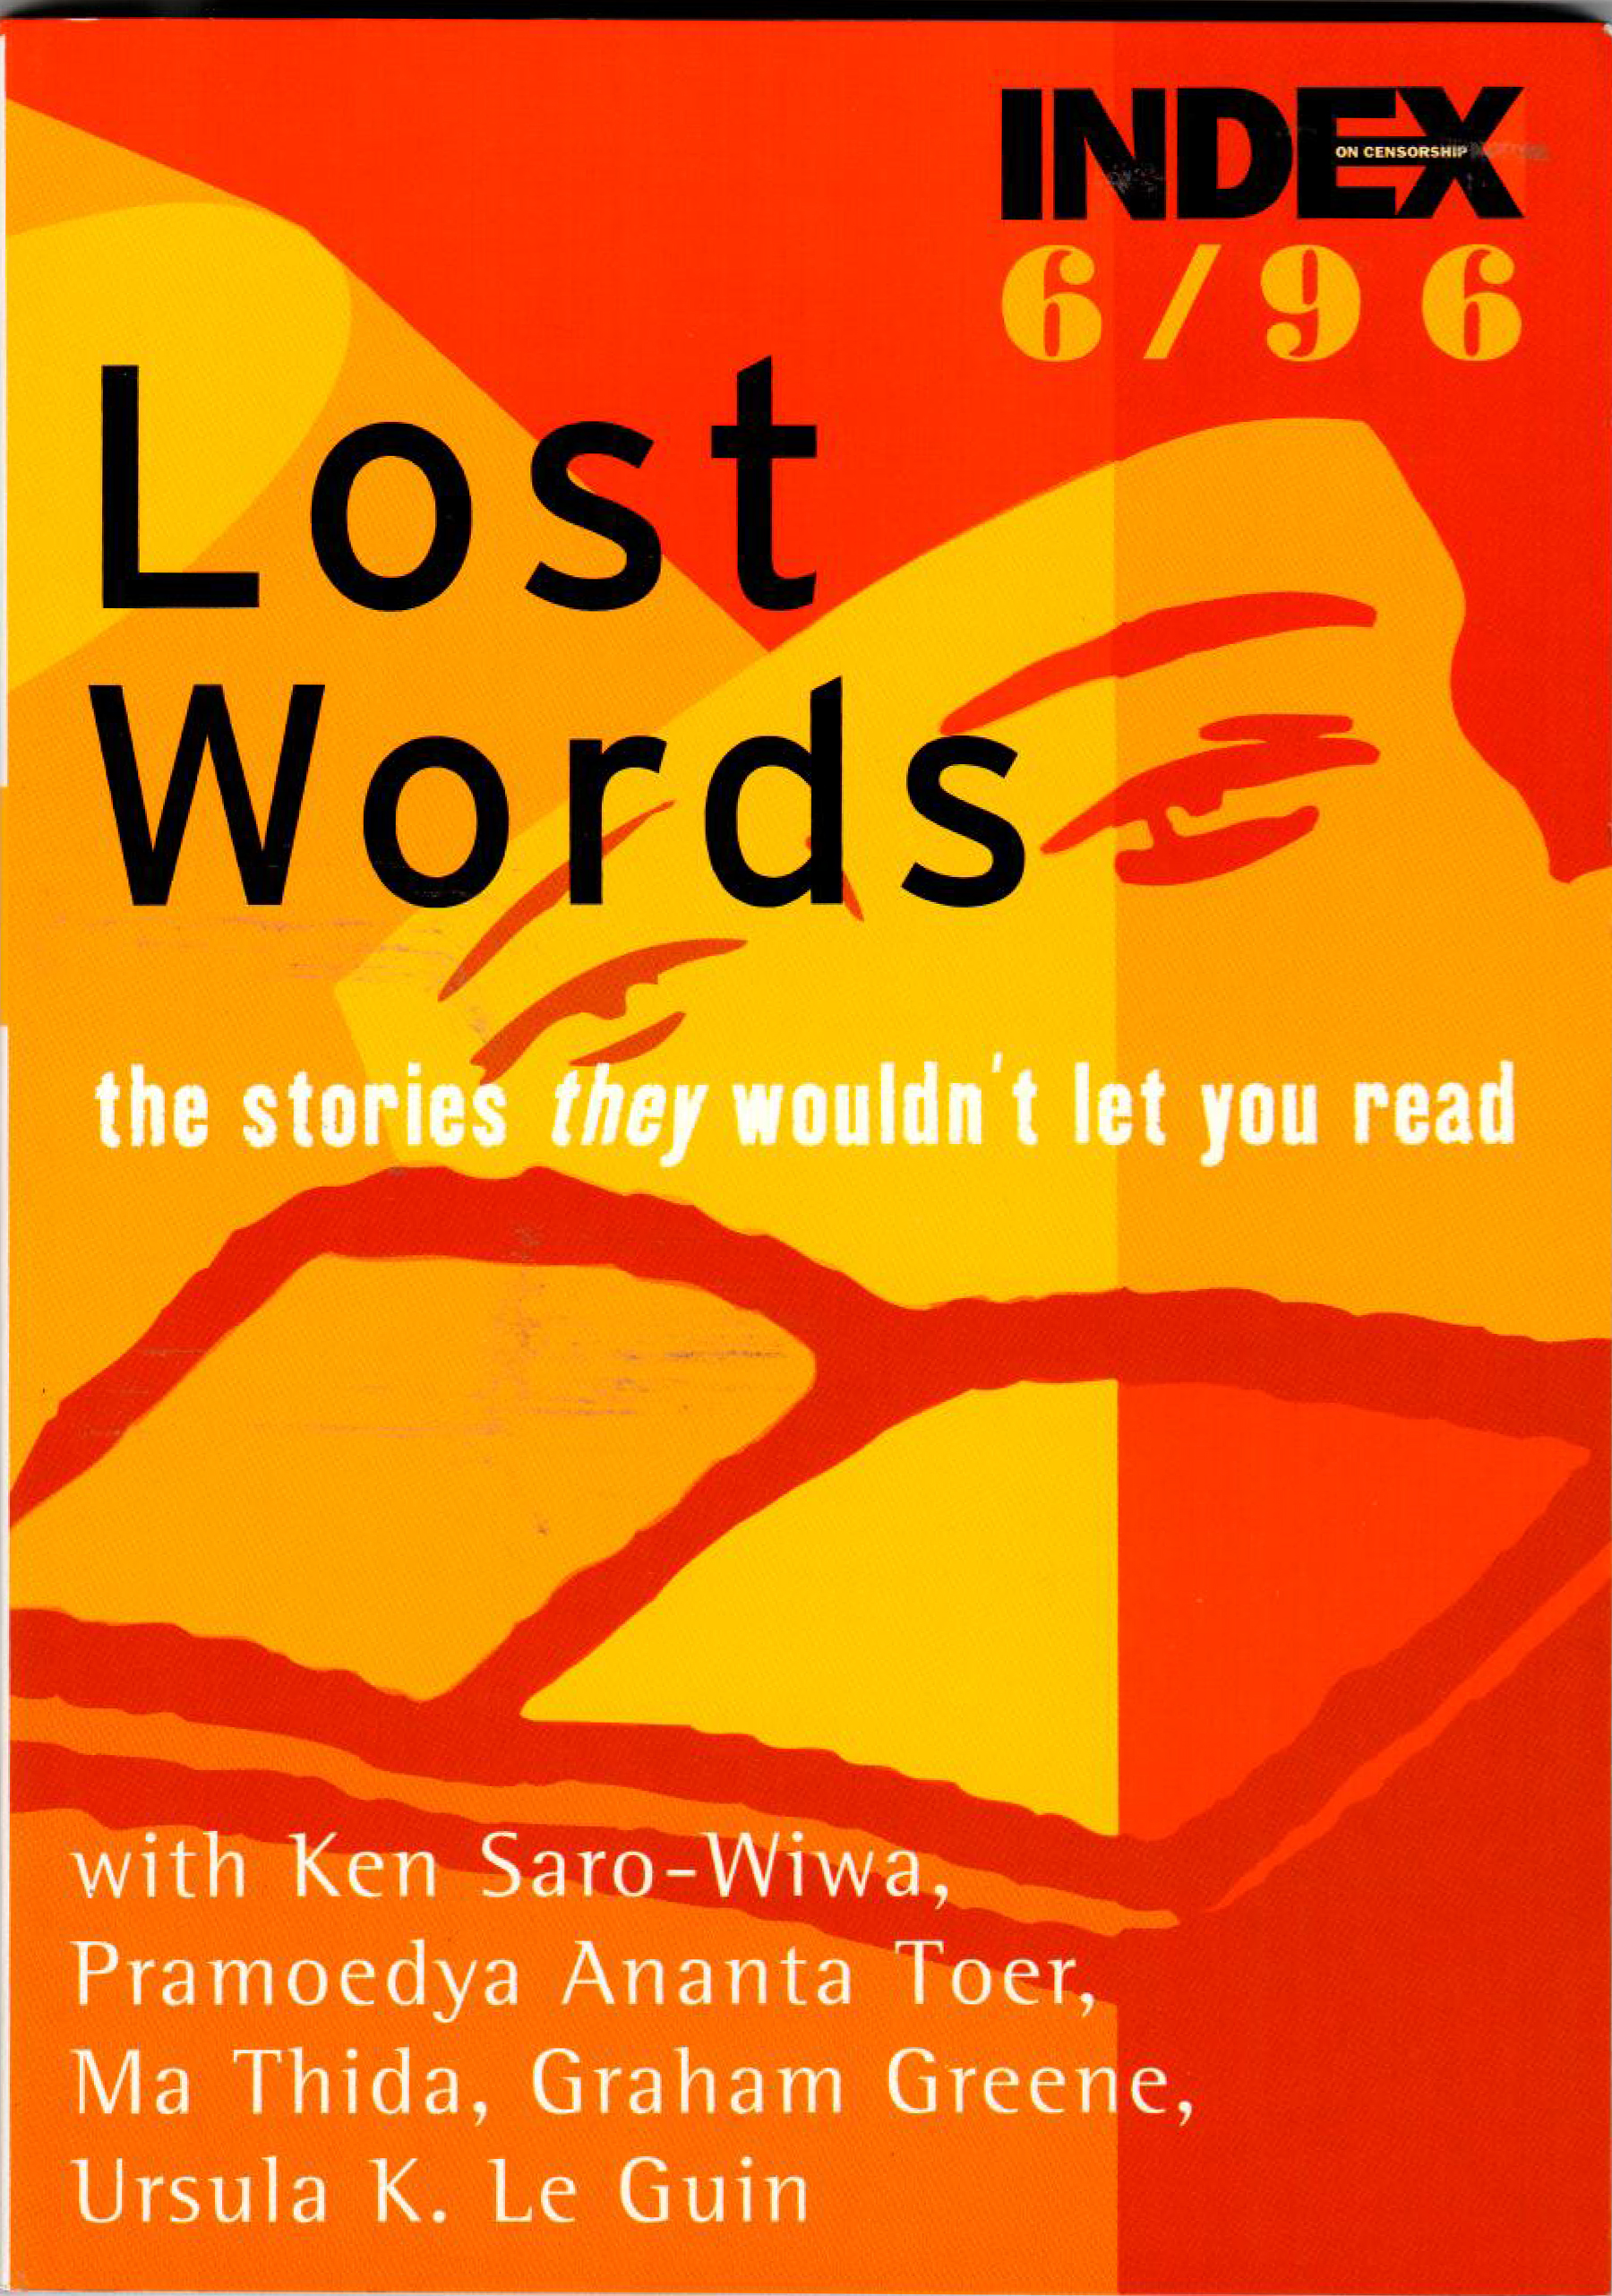 Lost words, the November 1996 issue of Index on Censorship magazine.